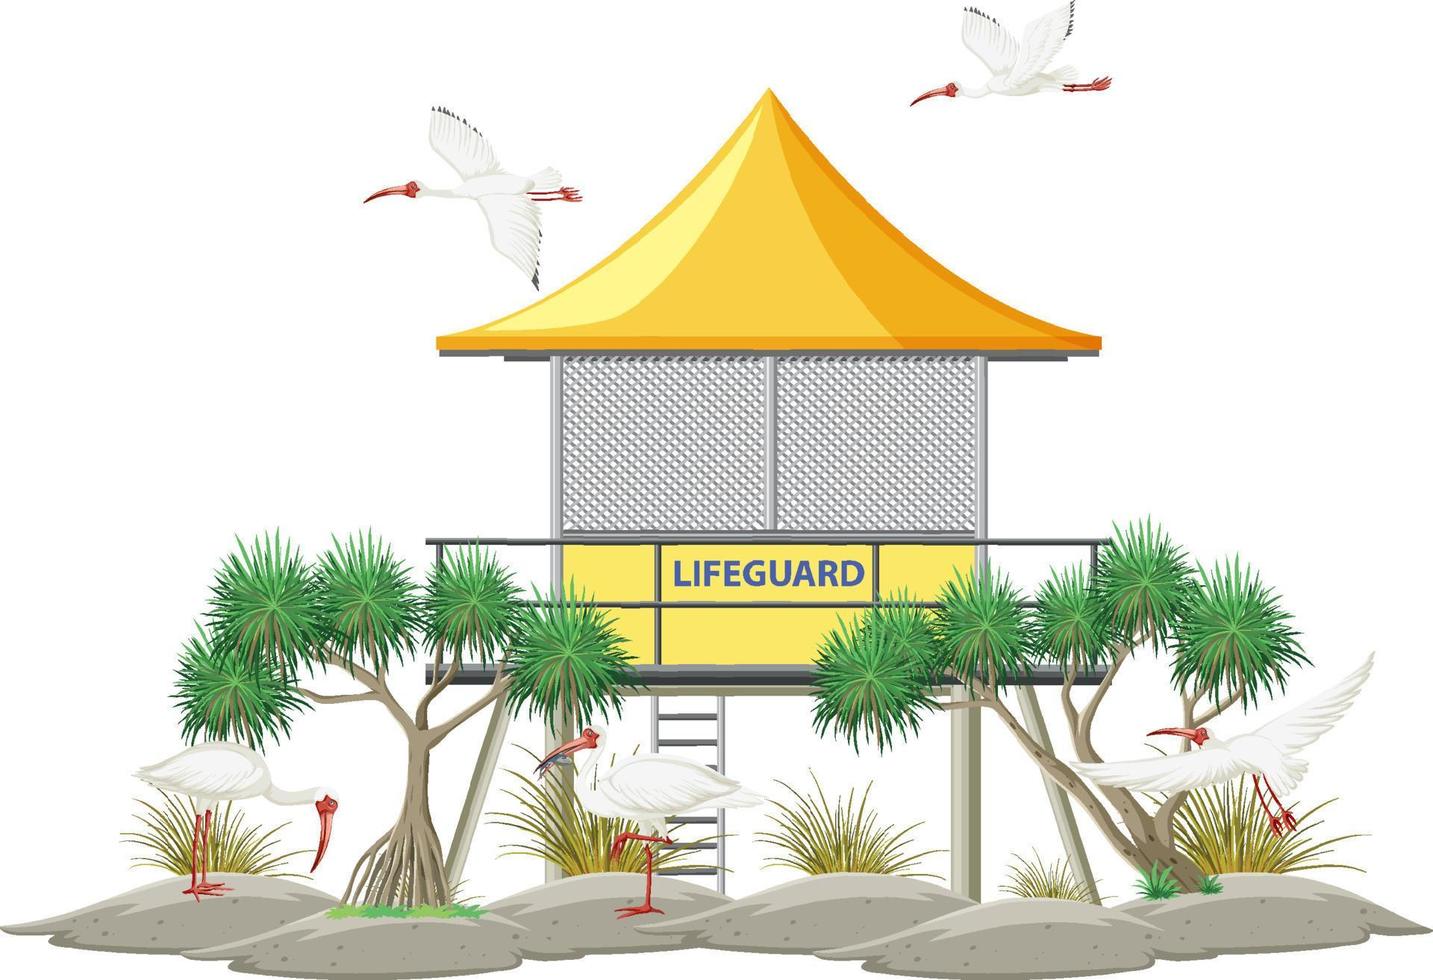 American white ibis group at lifeguard tower vector